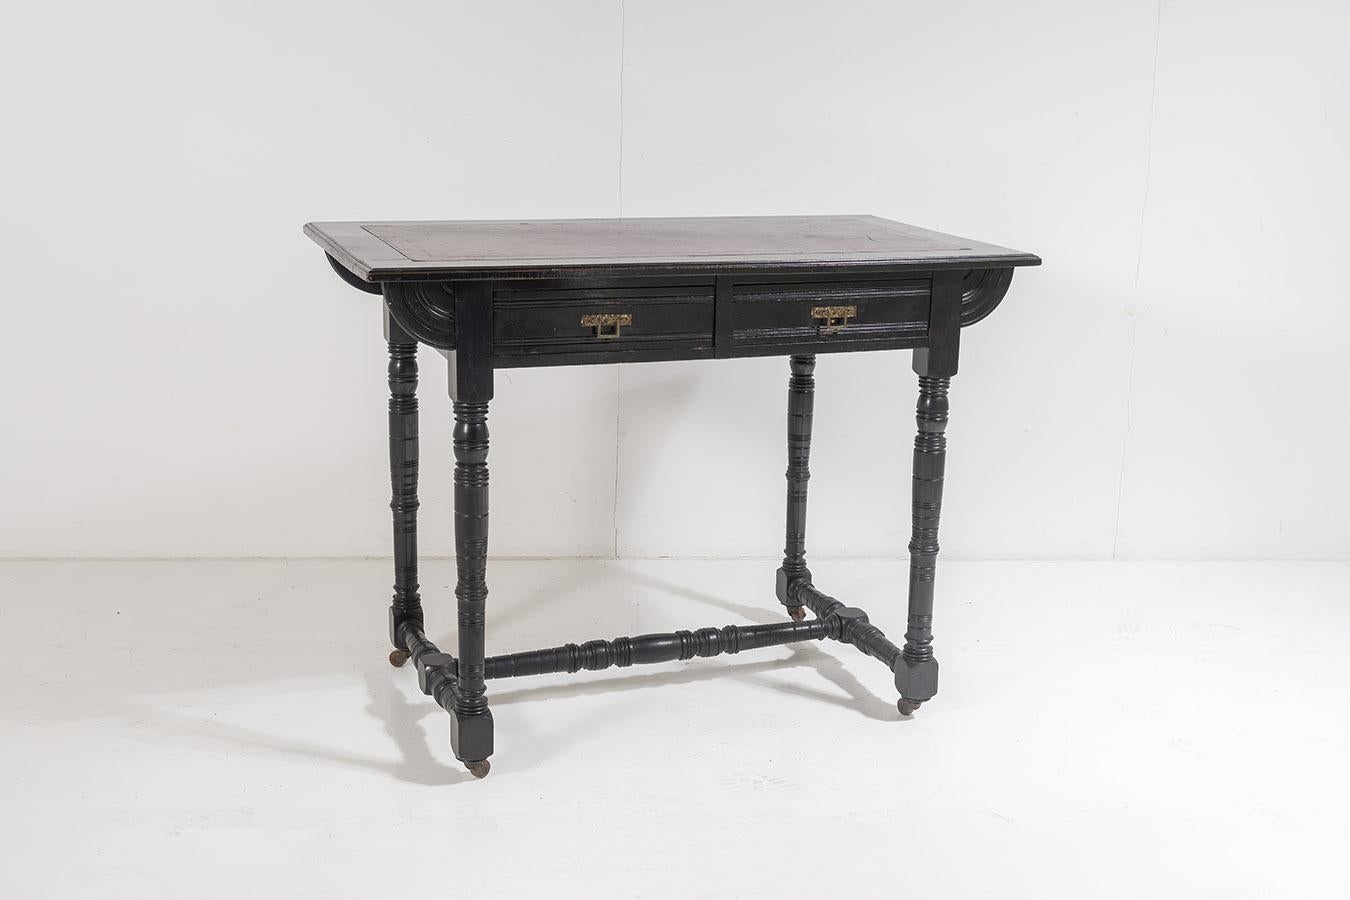 A superb little aesthetic movement writing desk is black mahogany ebonised finish with it original red leather inset top.

This piece contains so many wonderful detailing, the inset leather top features a gilt Greek Key border followed by a